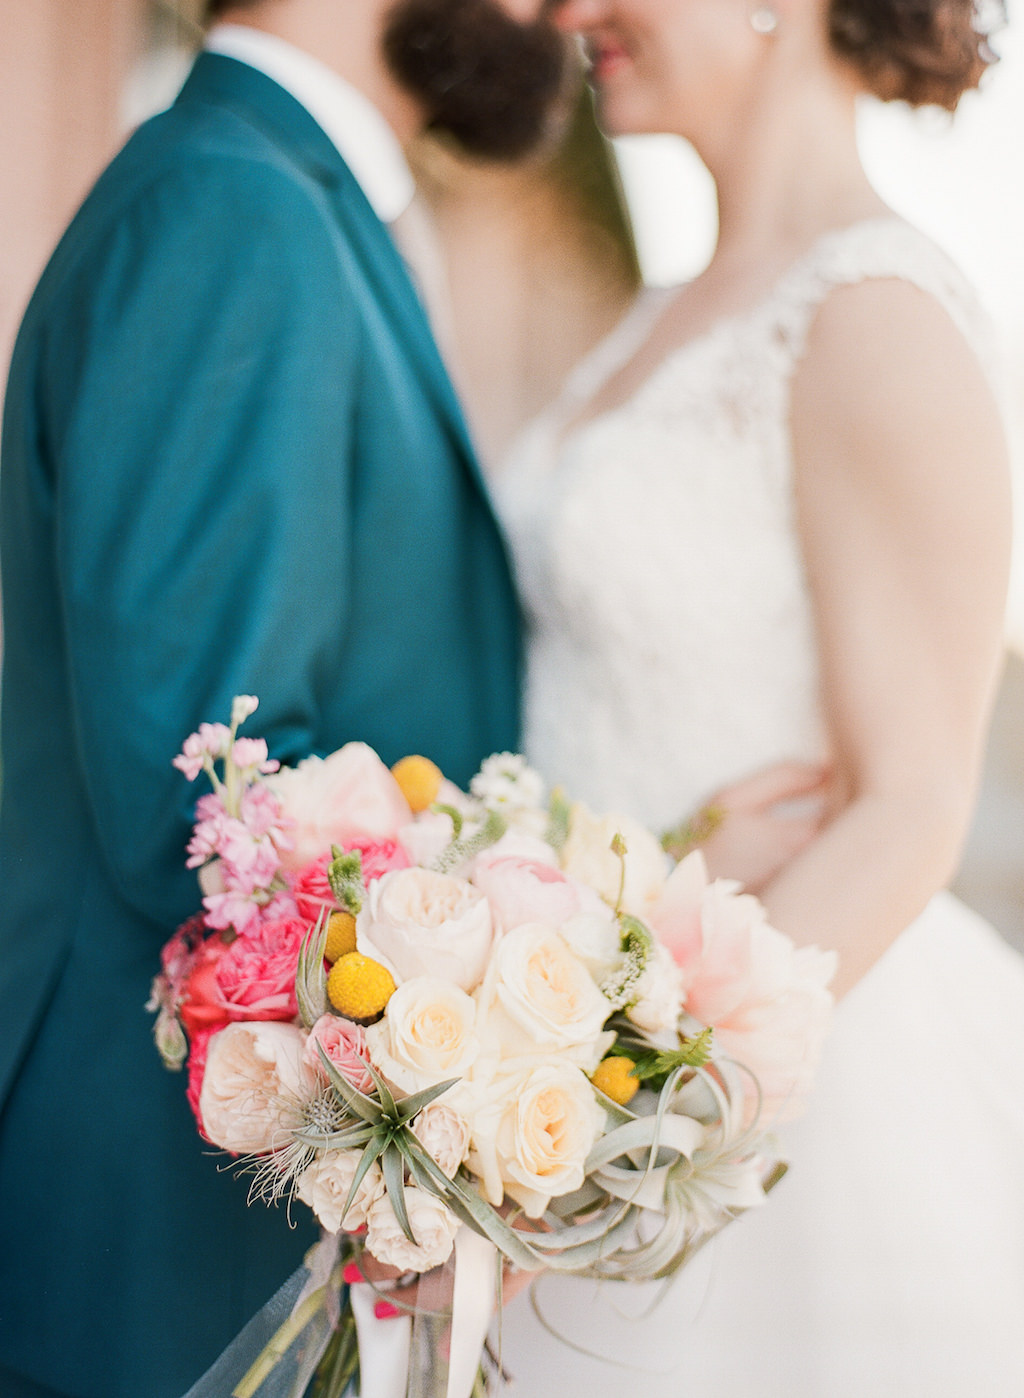 Bride and Groom Outdoor Wedding Portrait, Bride with Cream Rose, Blush Pink, Coral and Yellow Flower with Greenery Bouquet, Groom in Teal Suit